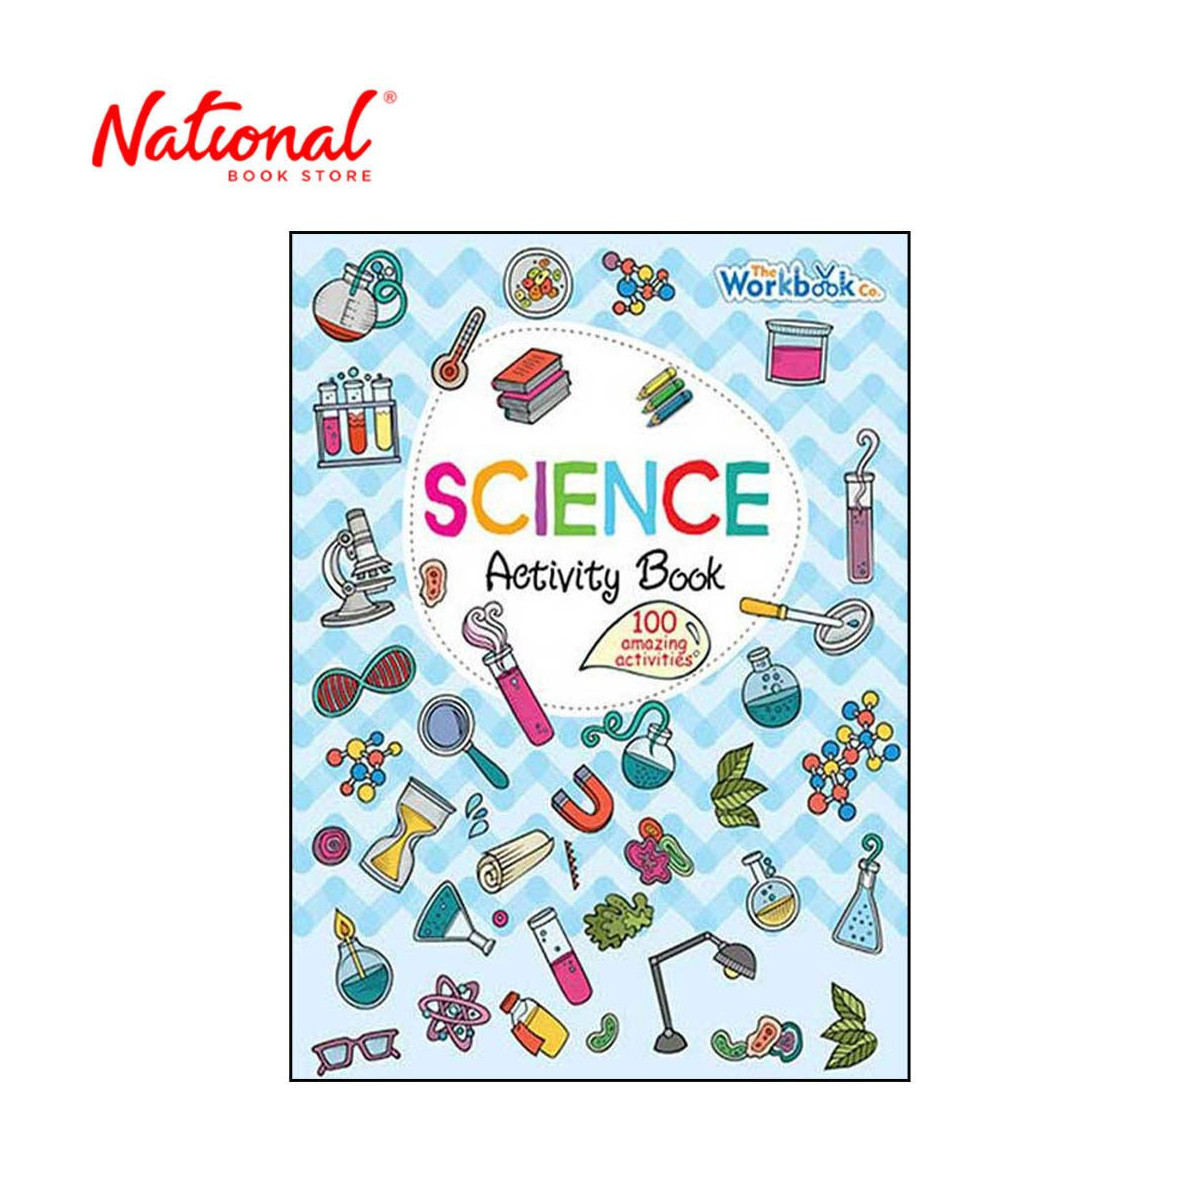 Science Activity Book - Trade Paperback - Workbook for Kids